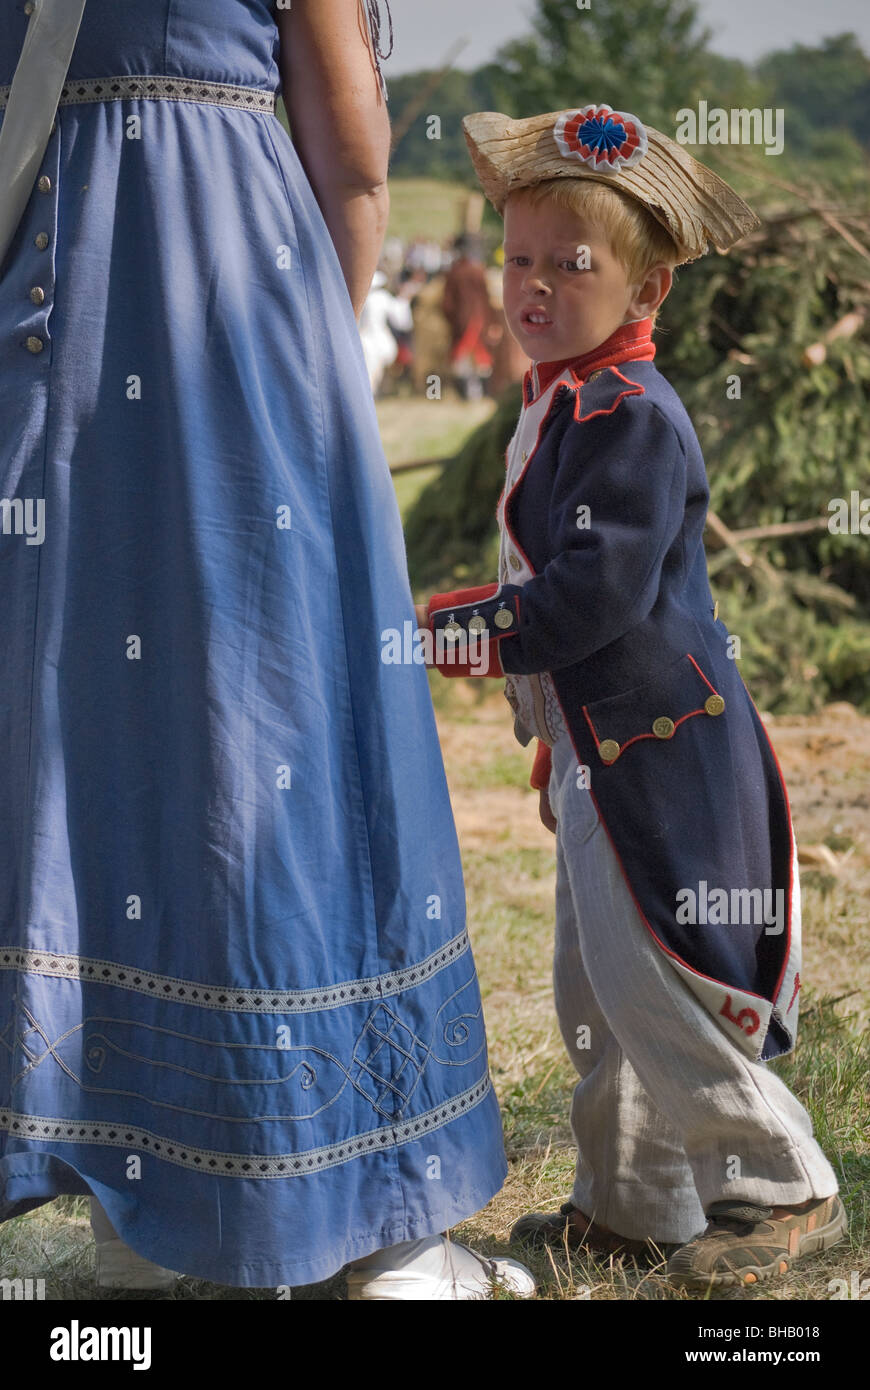 Child holding to mother's dress at Reenactment of Siege of Neisse during 1807 Napoleonic War with Prussia in Nysa, Poland Stock Photo